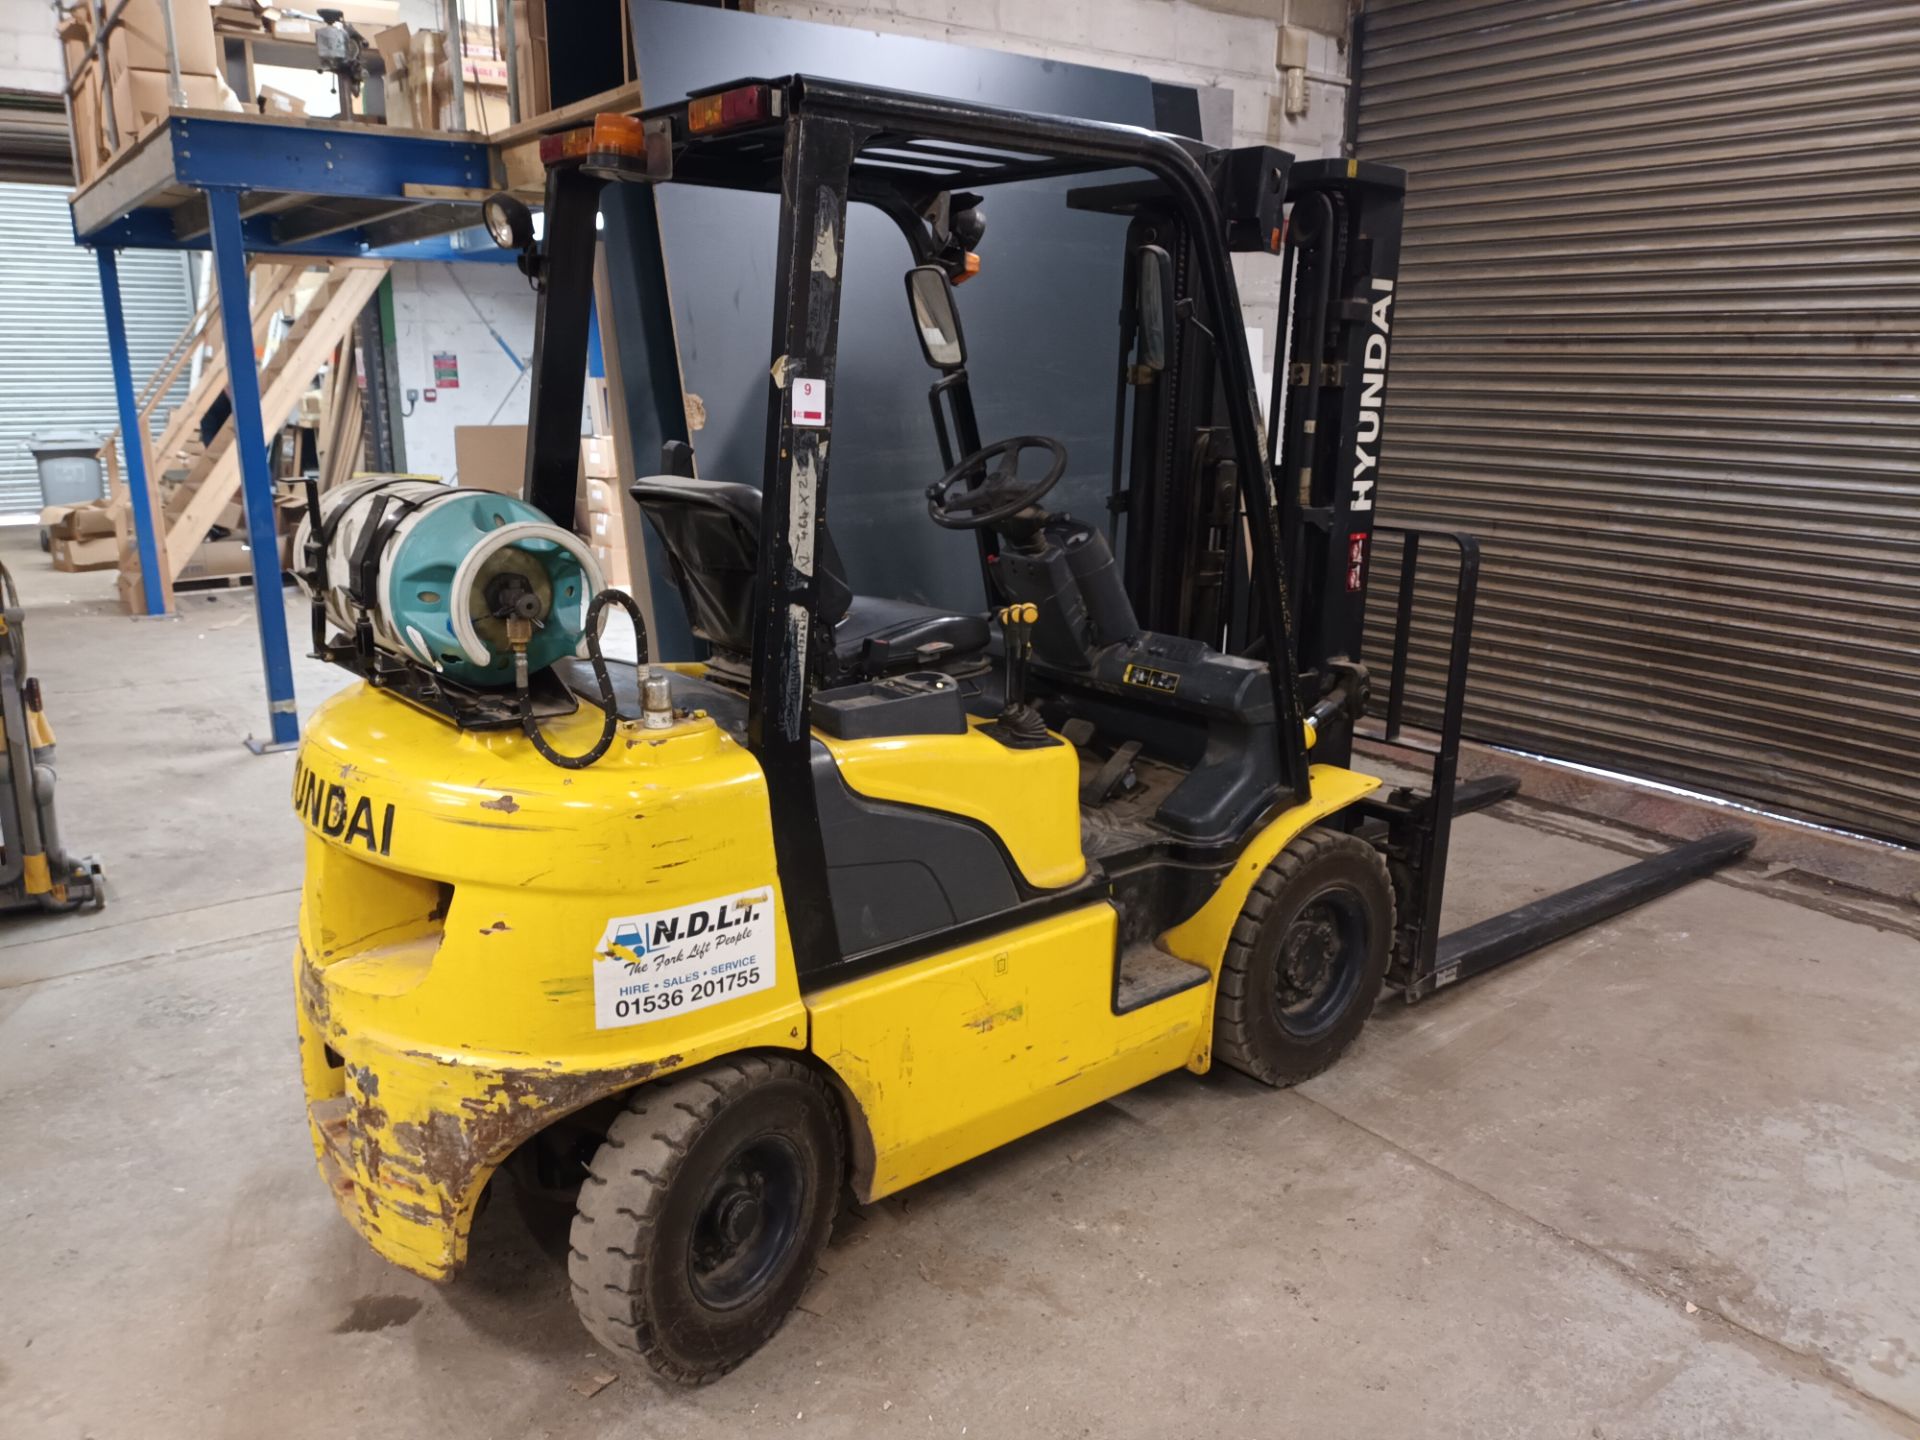 Hyundai 25L-7A LPG forklift truck (2011) with 2,430 hours *DELAYED COLLECTION* - Image 2 of 9